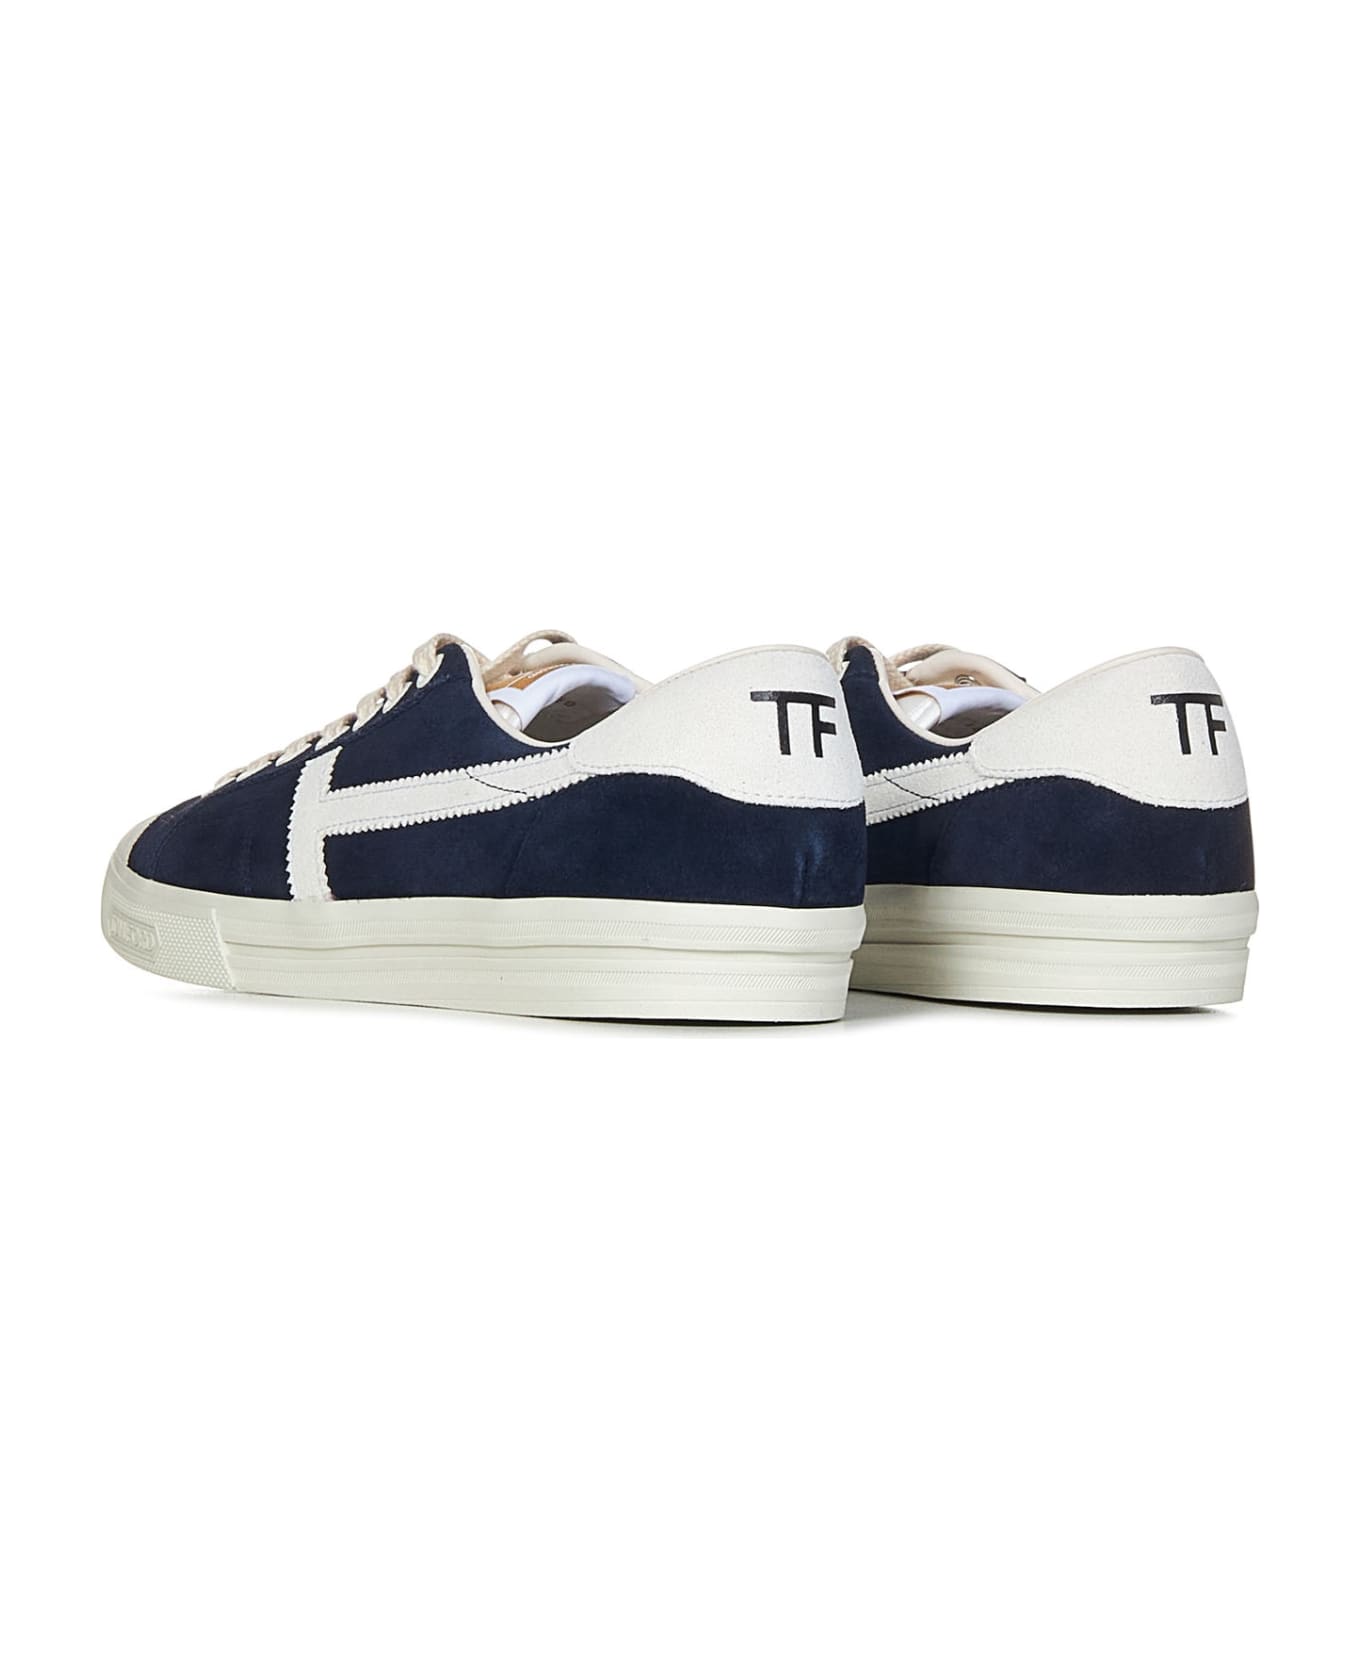 Tom Ford Jarvis Sneakers - Blue